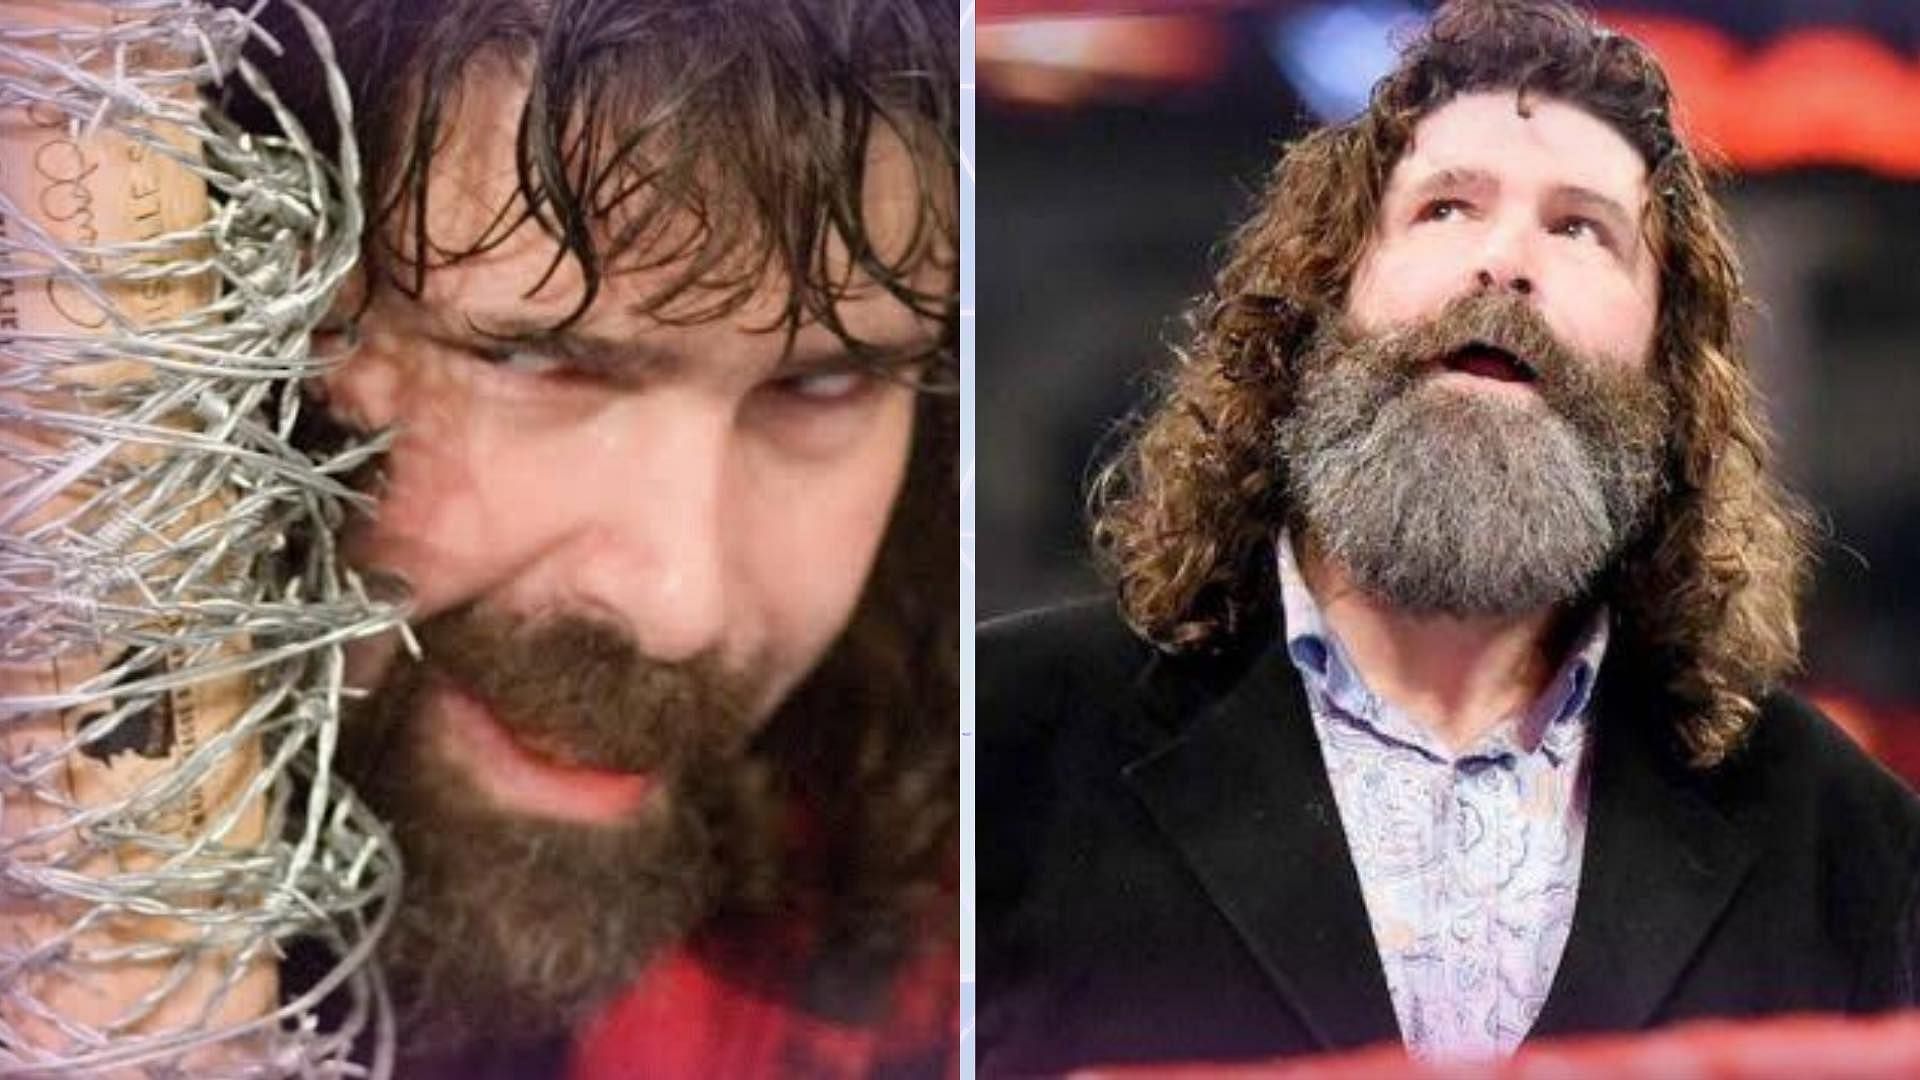 Mick Foley has not had the safest career